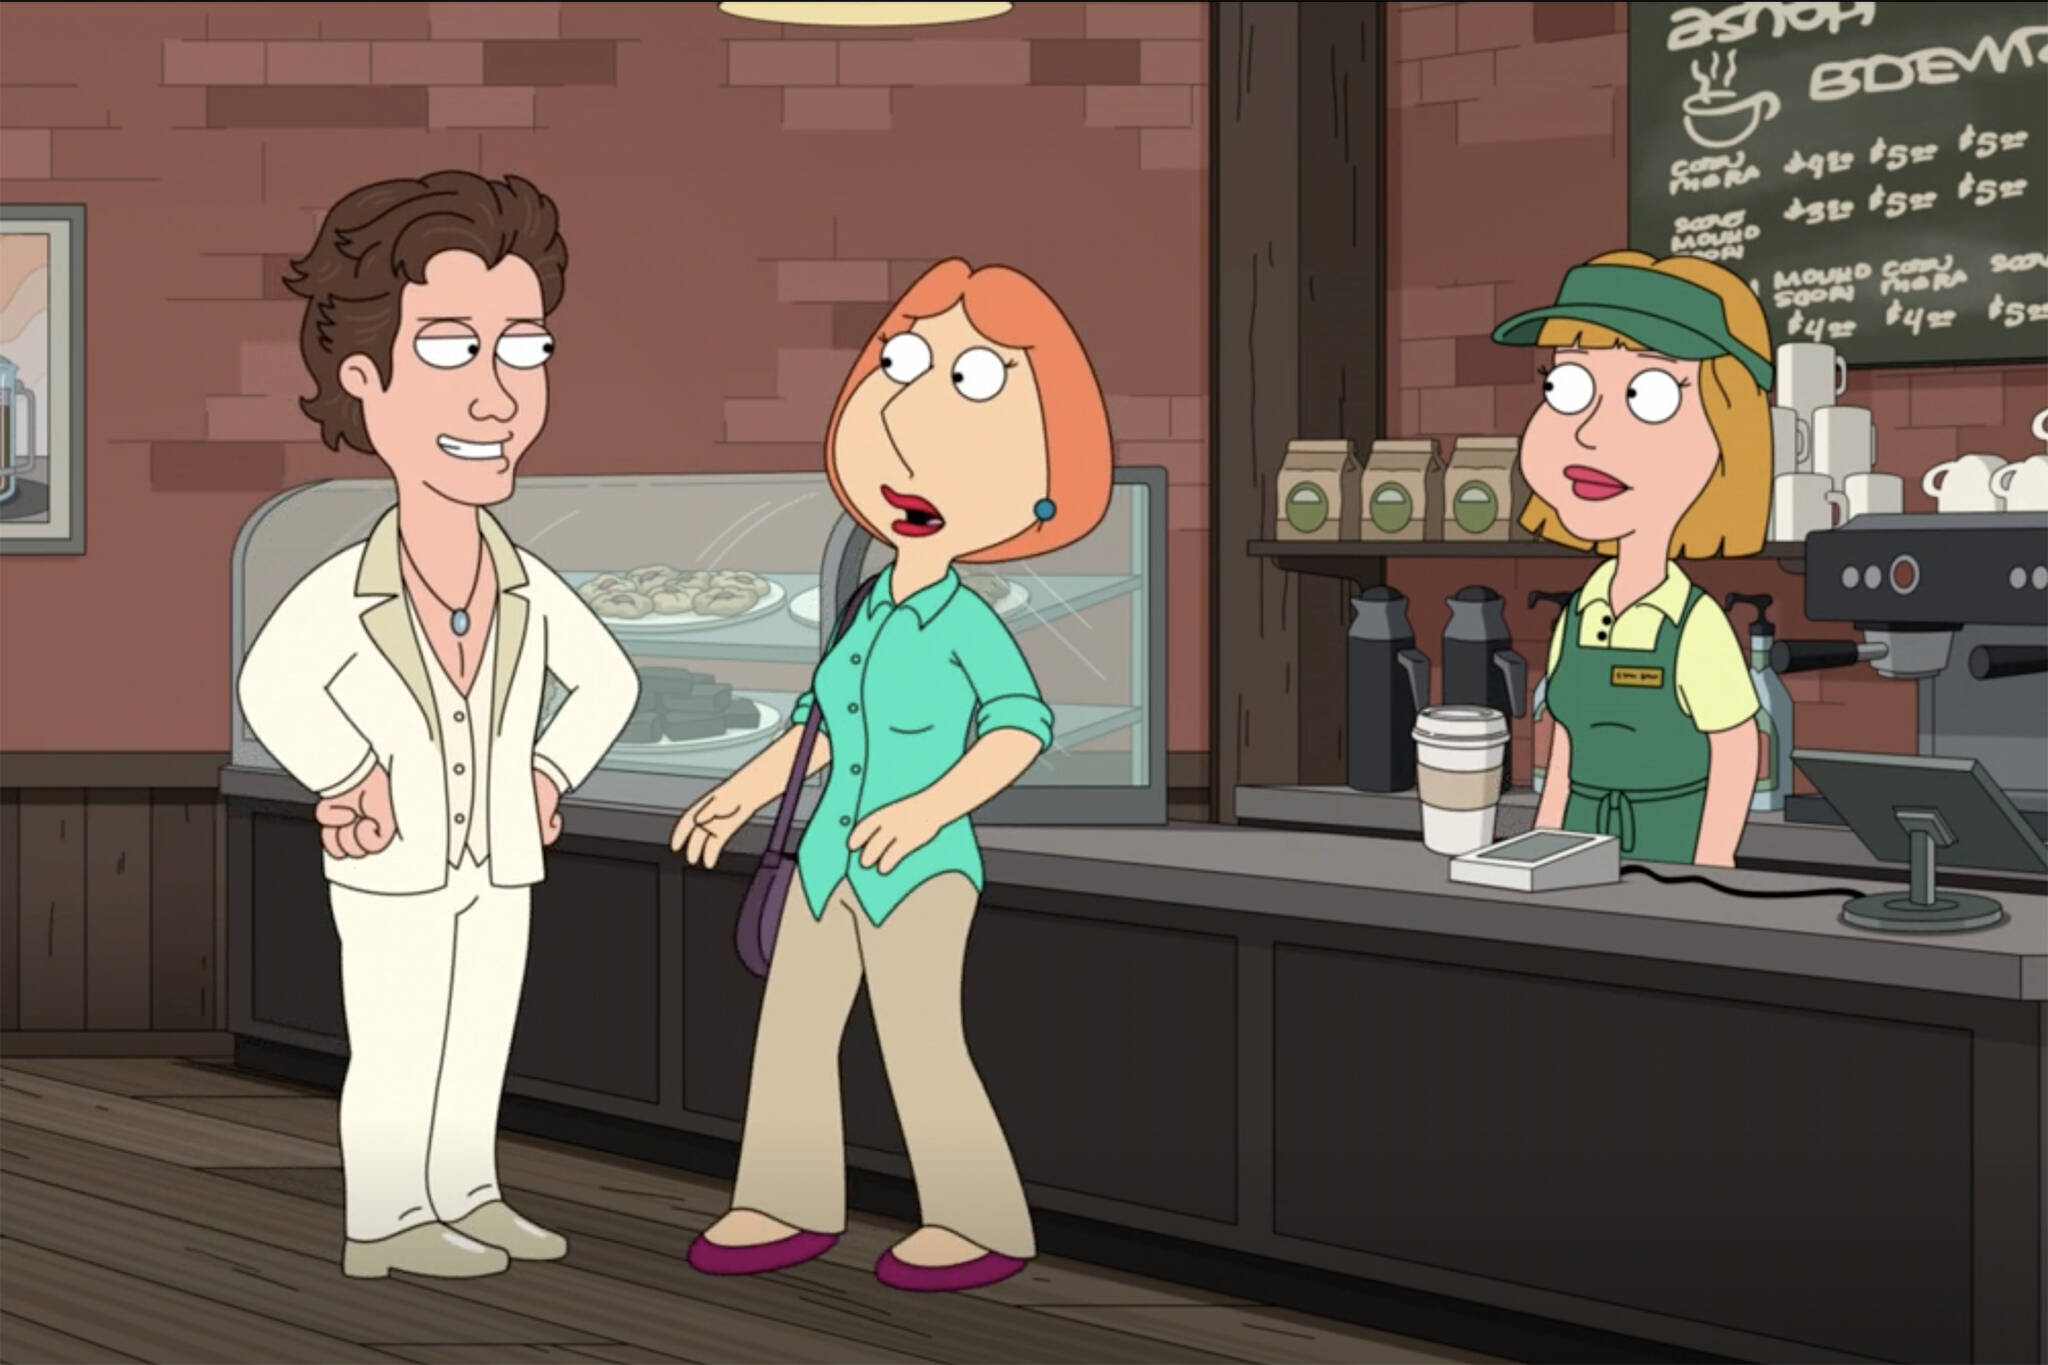 Shawn Mendes saves suburban moms in the newest episode of Family Guy